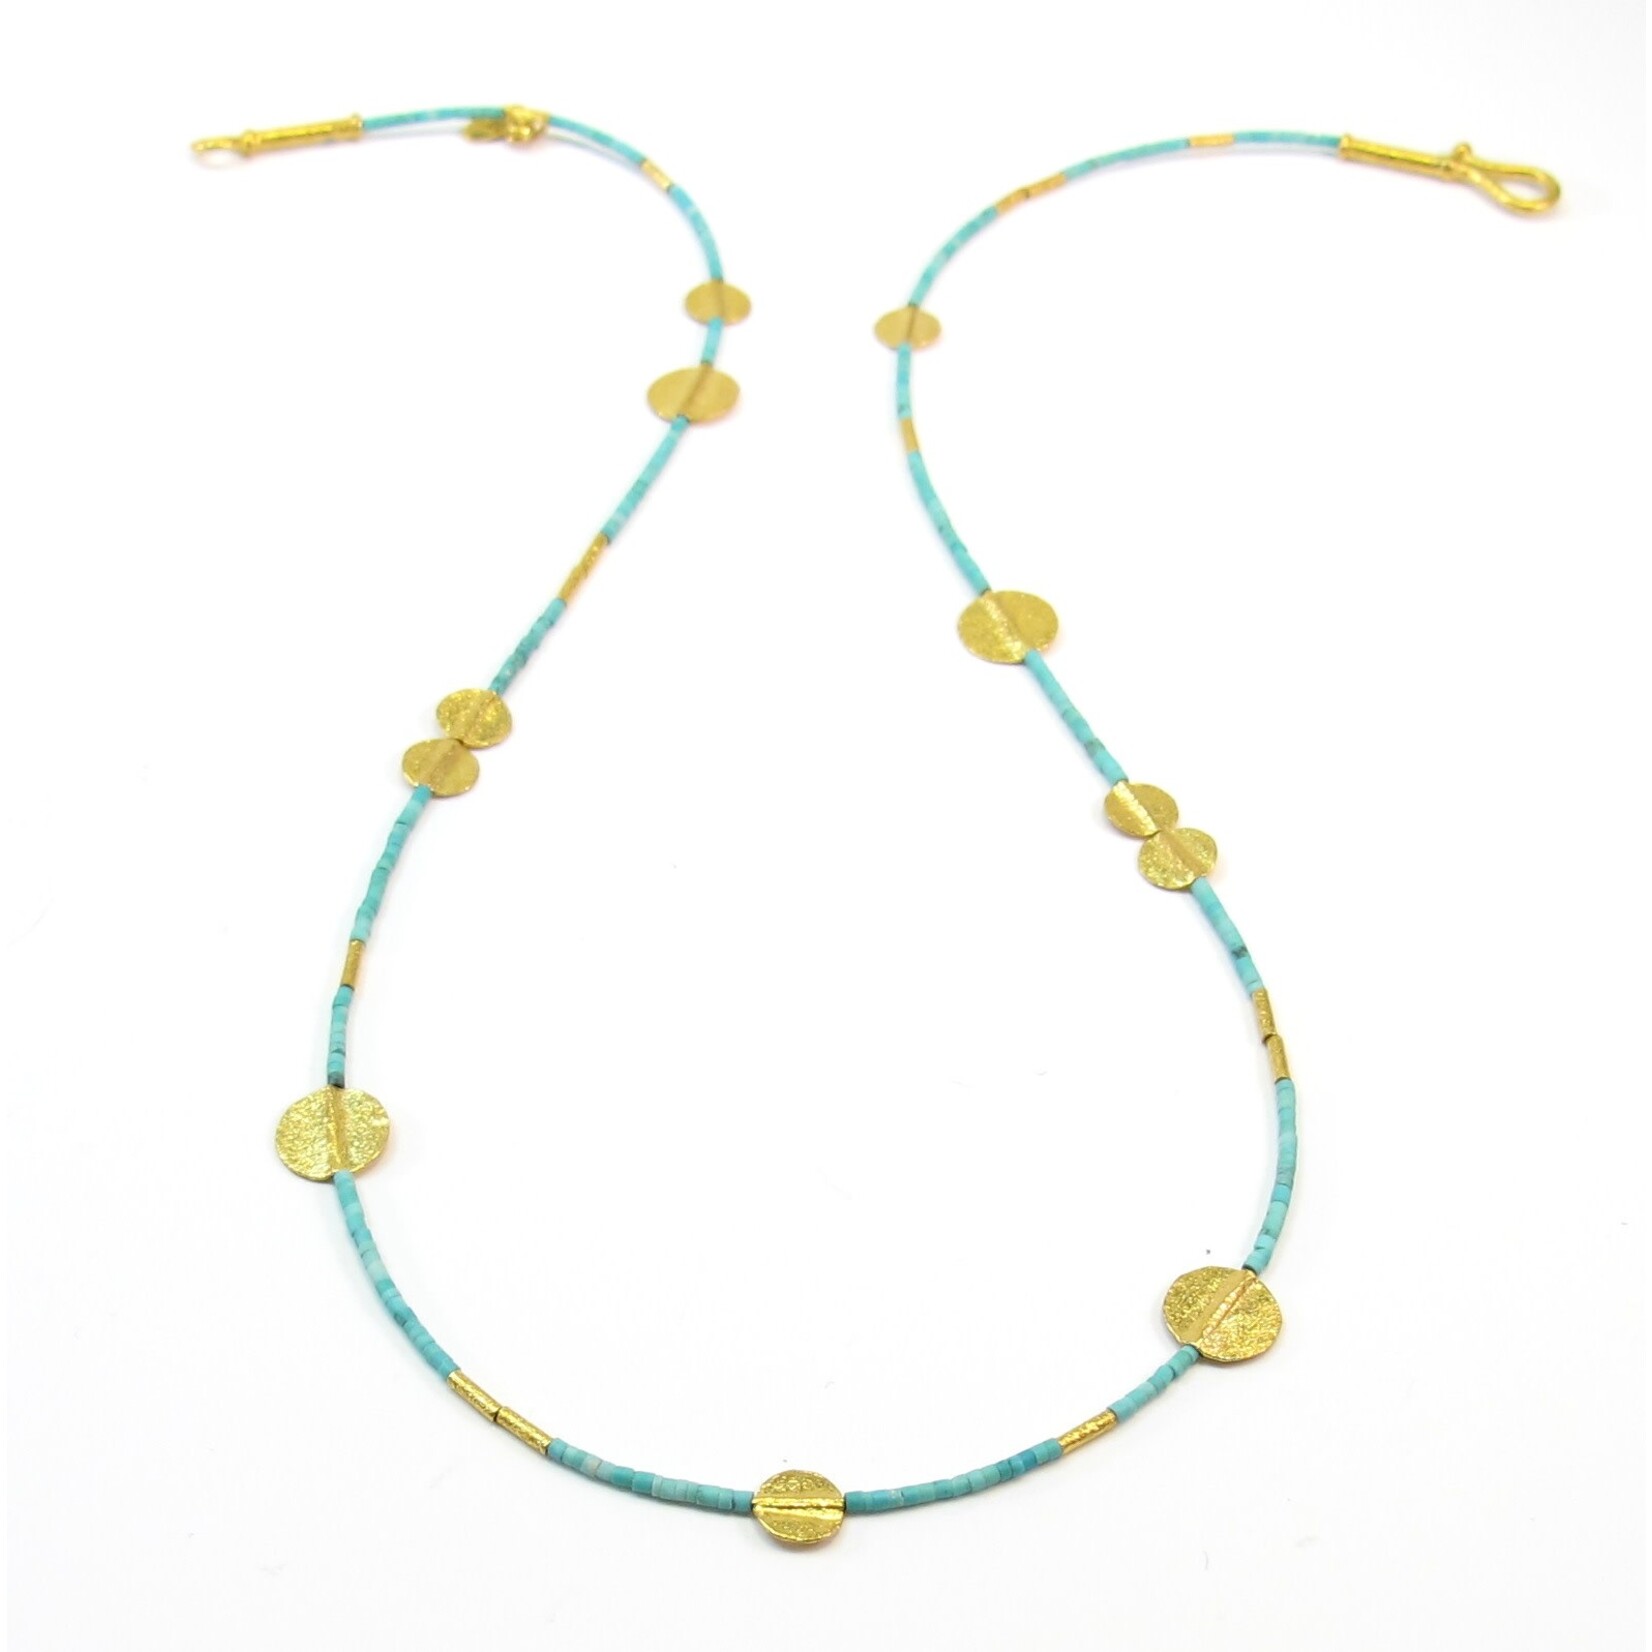 ARA Collection Turquoise and 24K Gold Disc Necklace, 17.5"